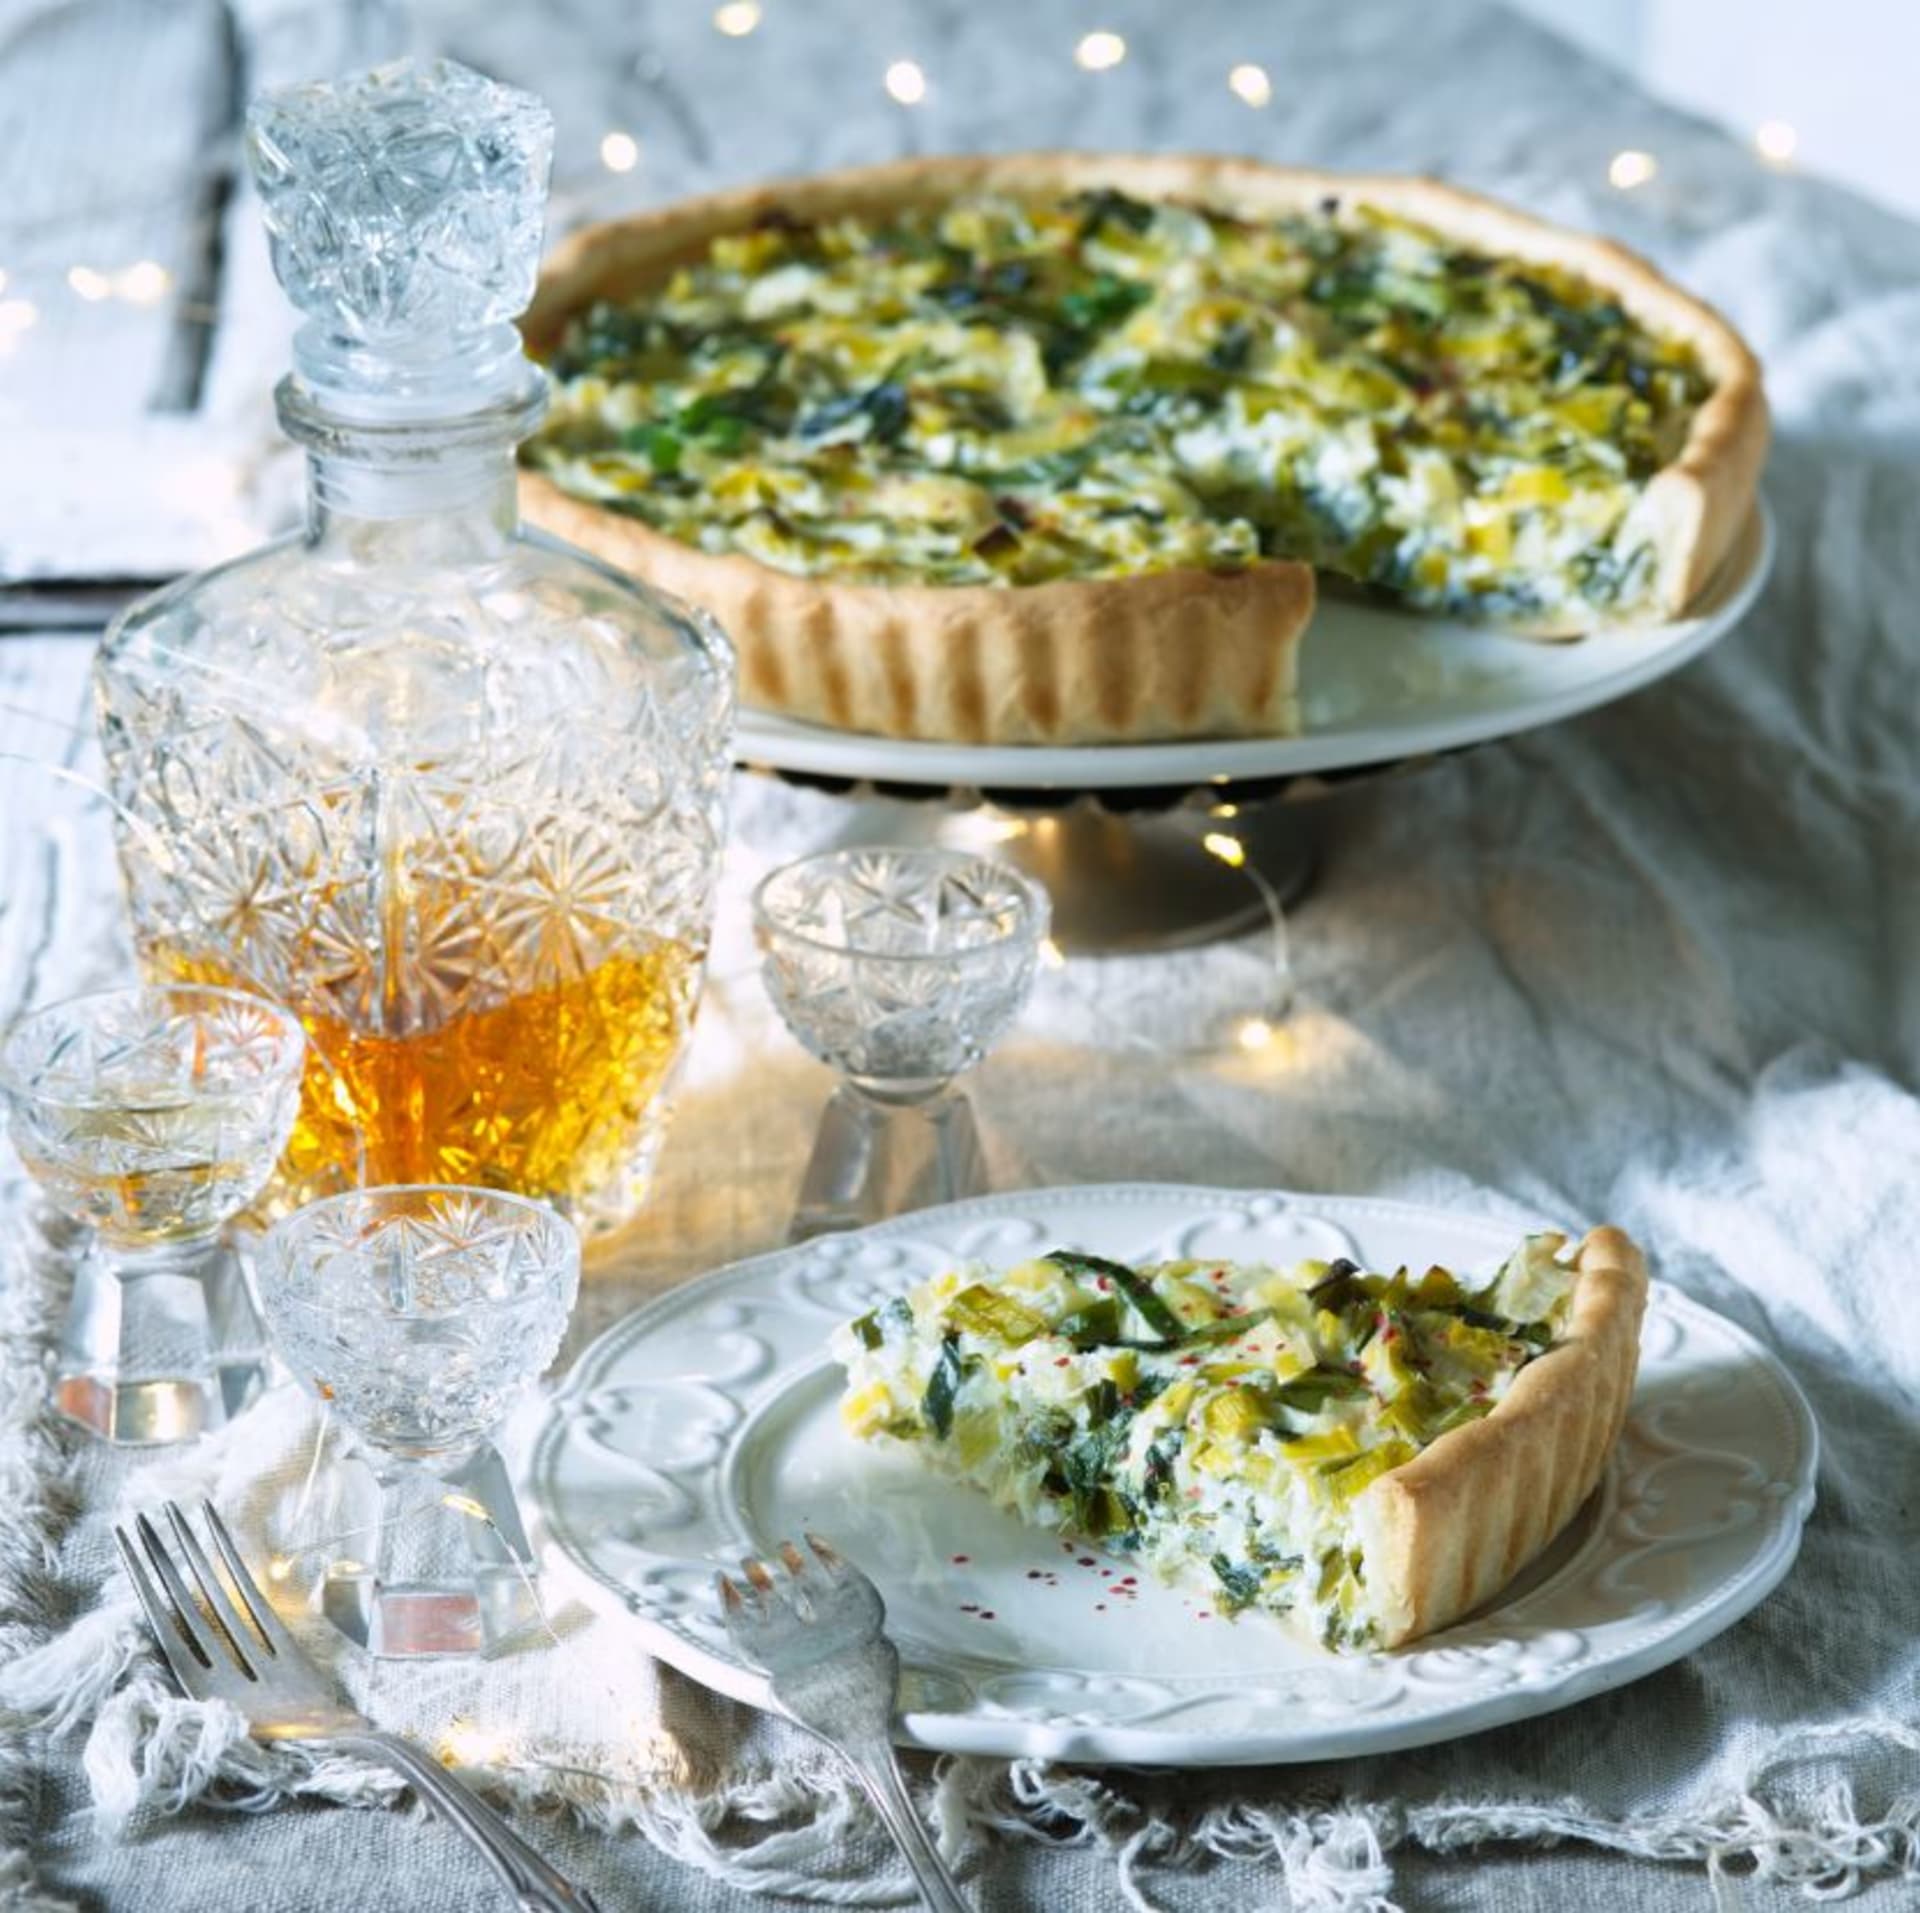 Treasures of French cuisine: leek pie made with shortcrust pastry